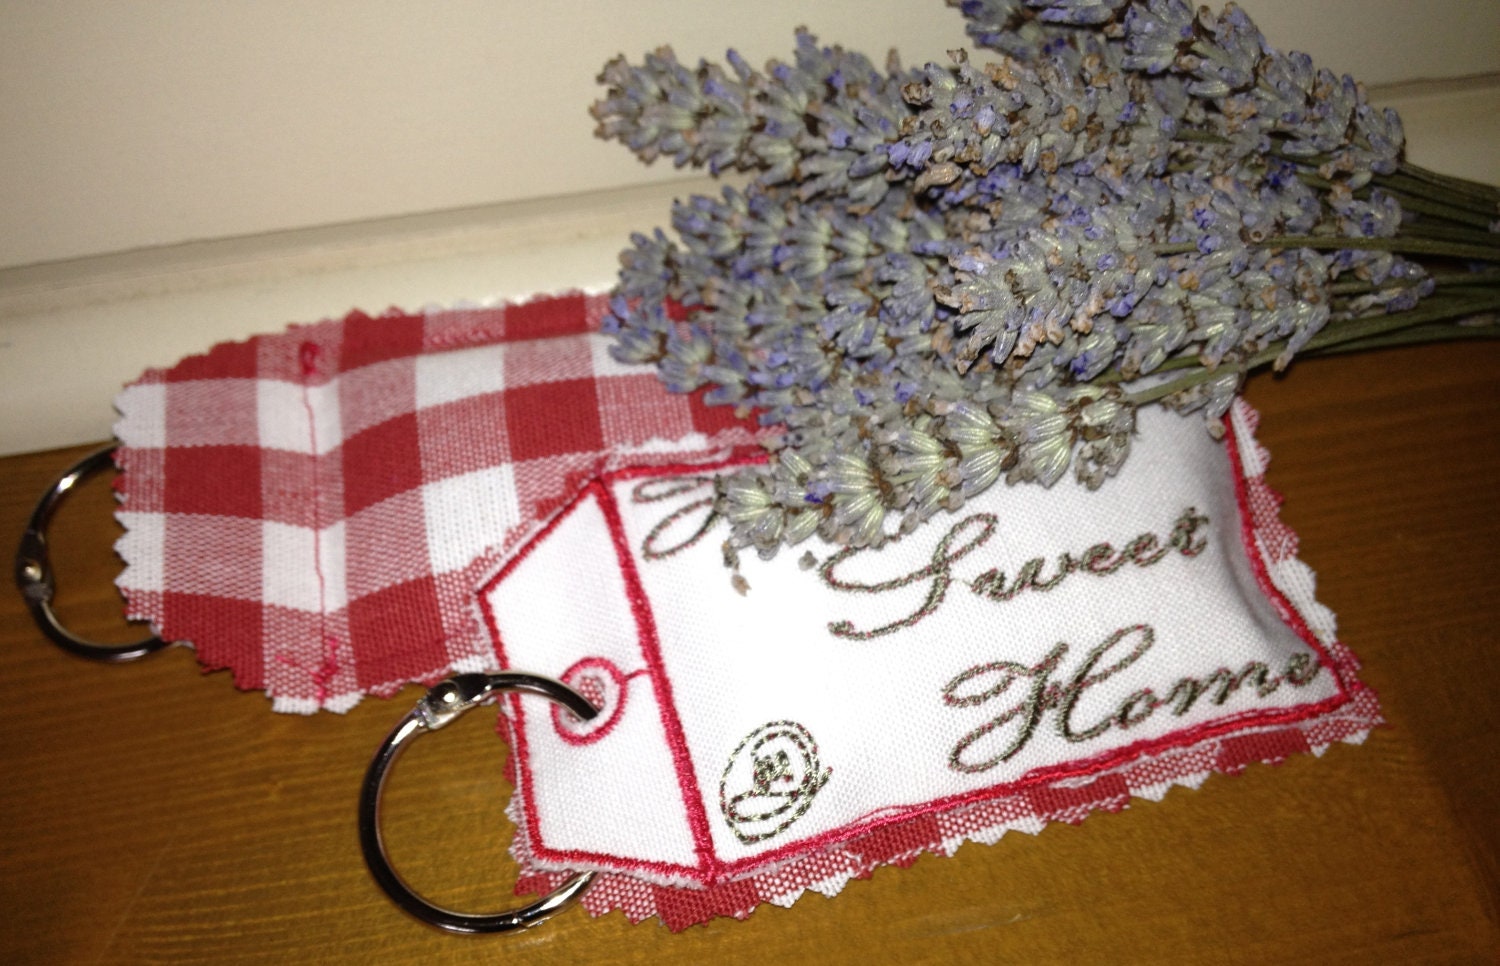 Home Sweet Home - homemade embroidery, Organic French Lavender